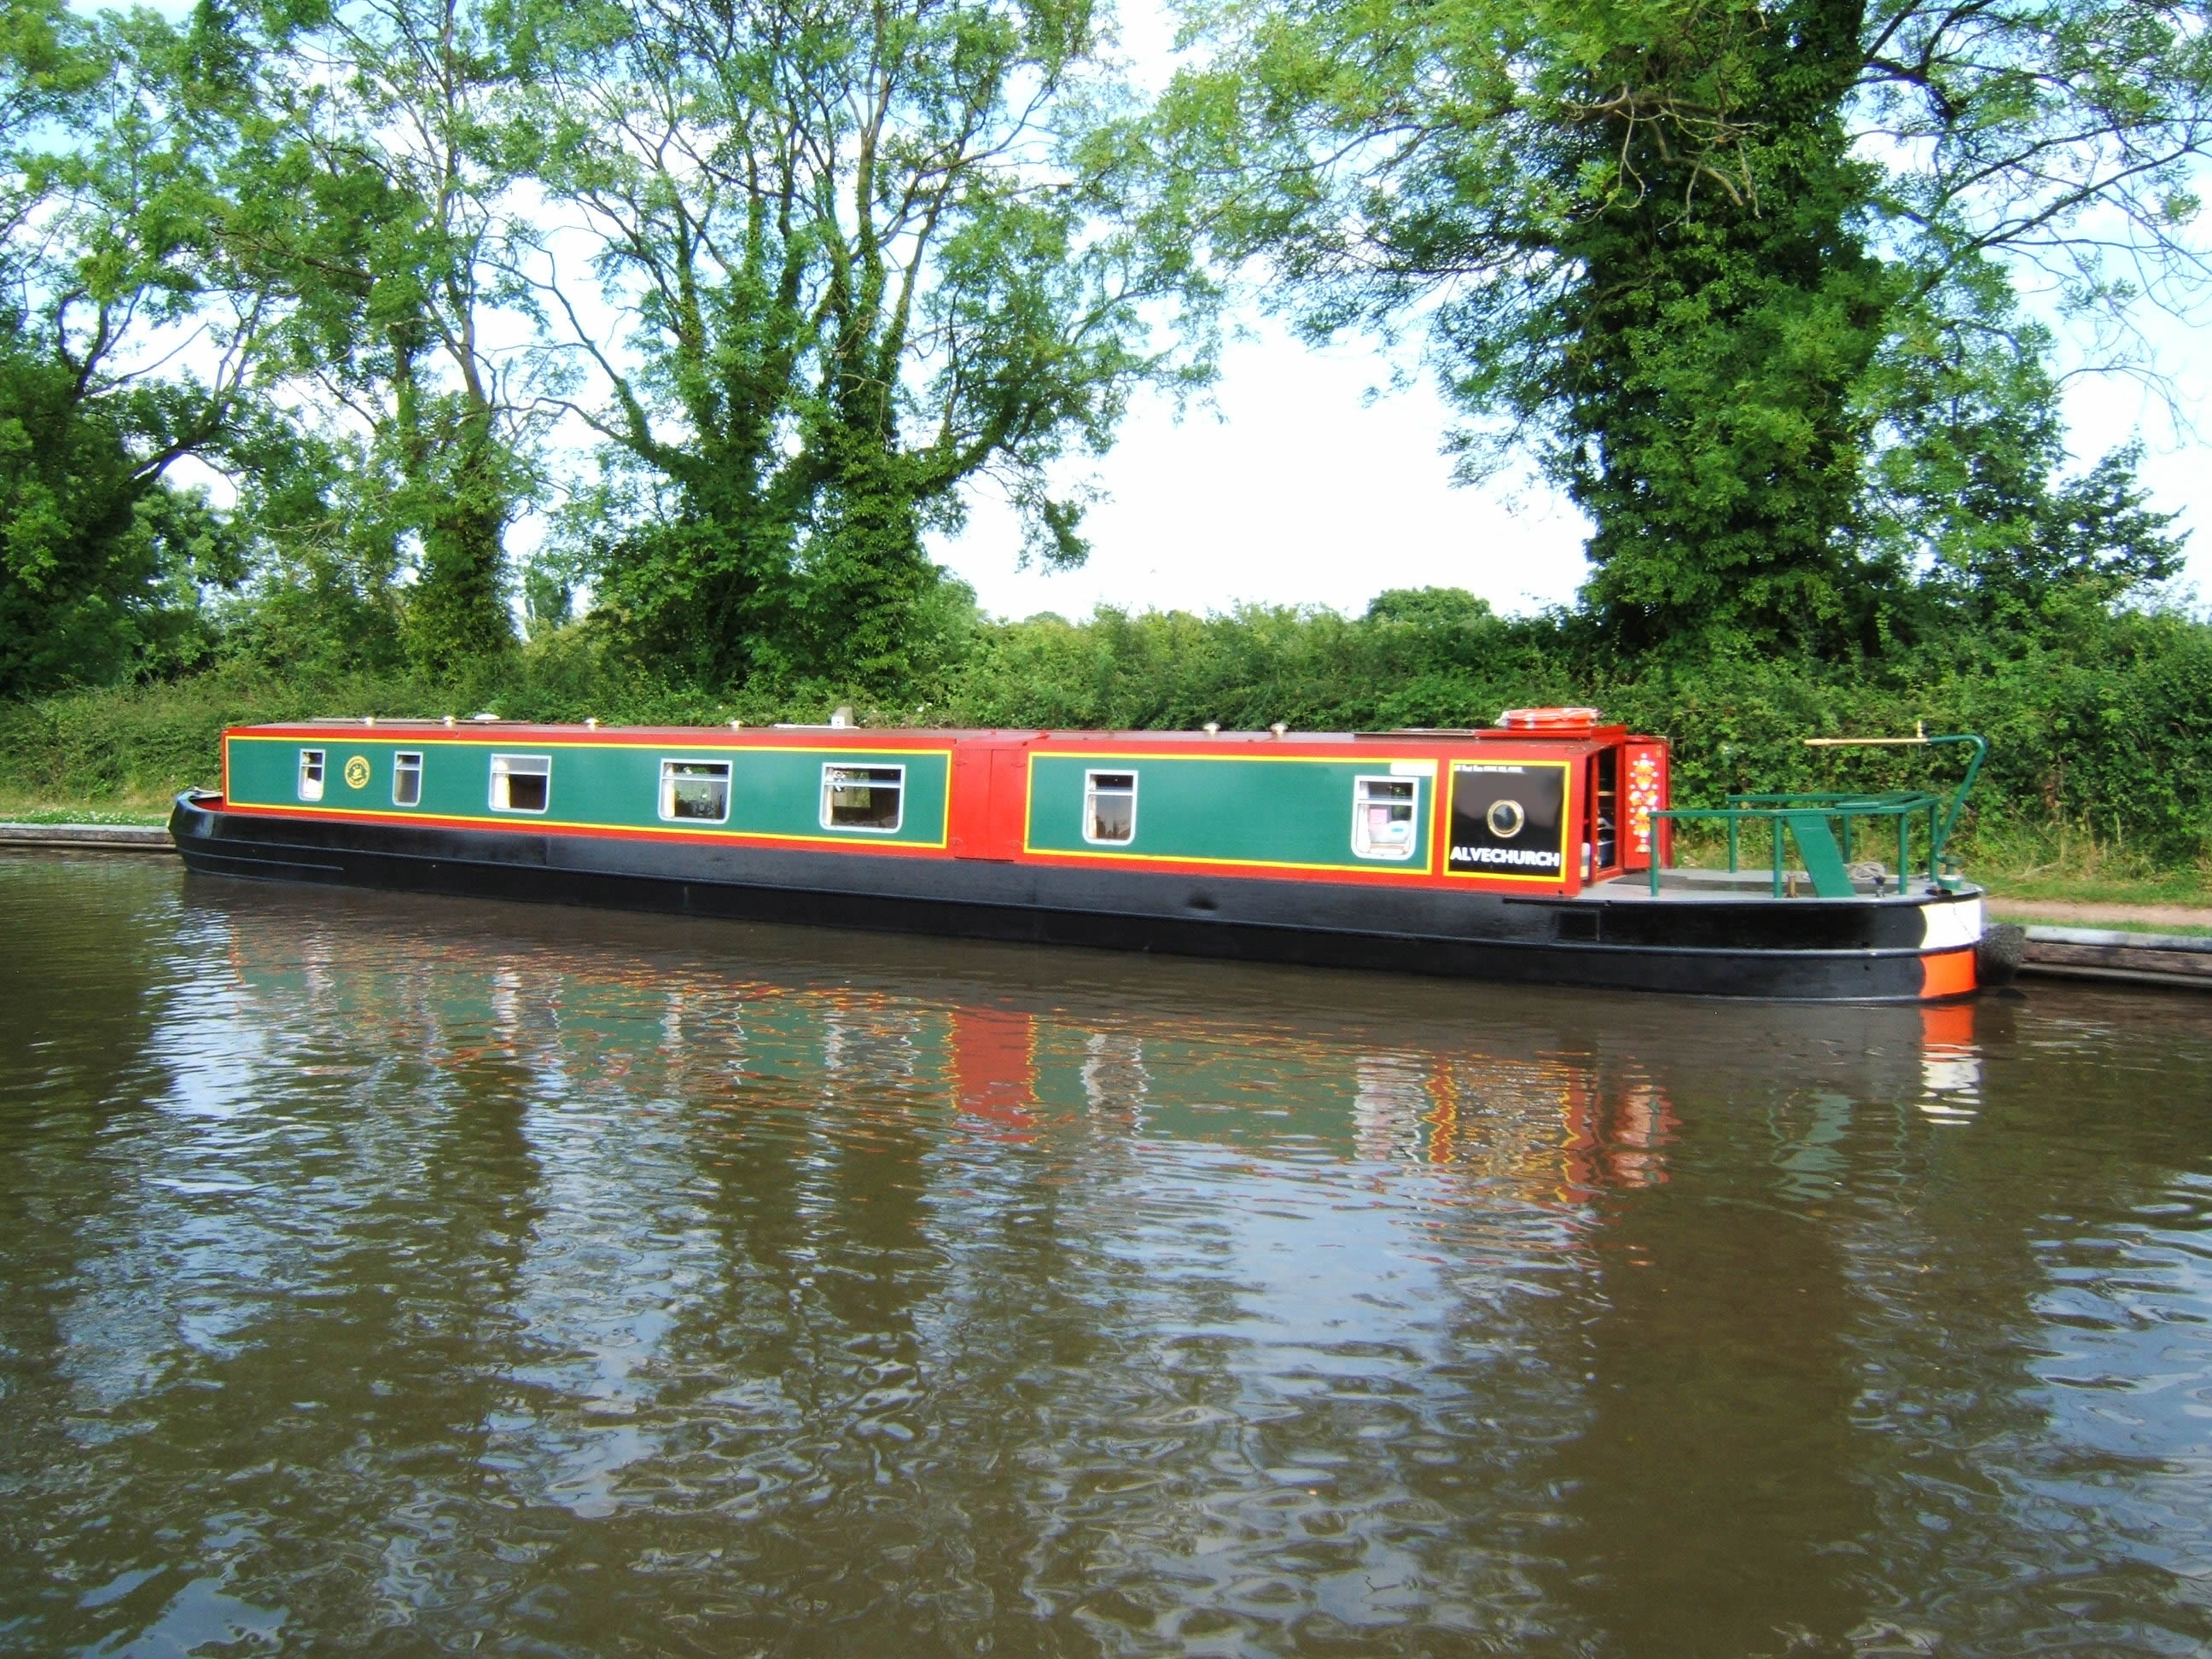 The Swan class canal boat